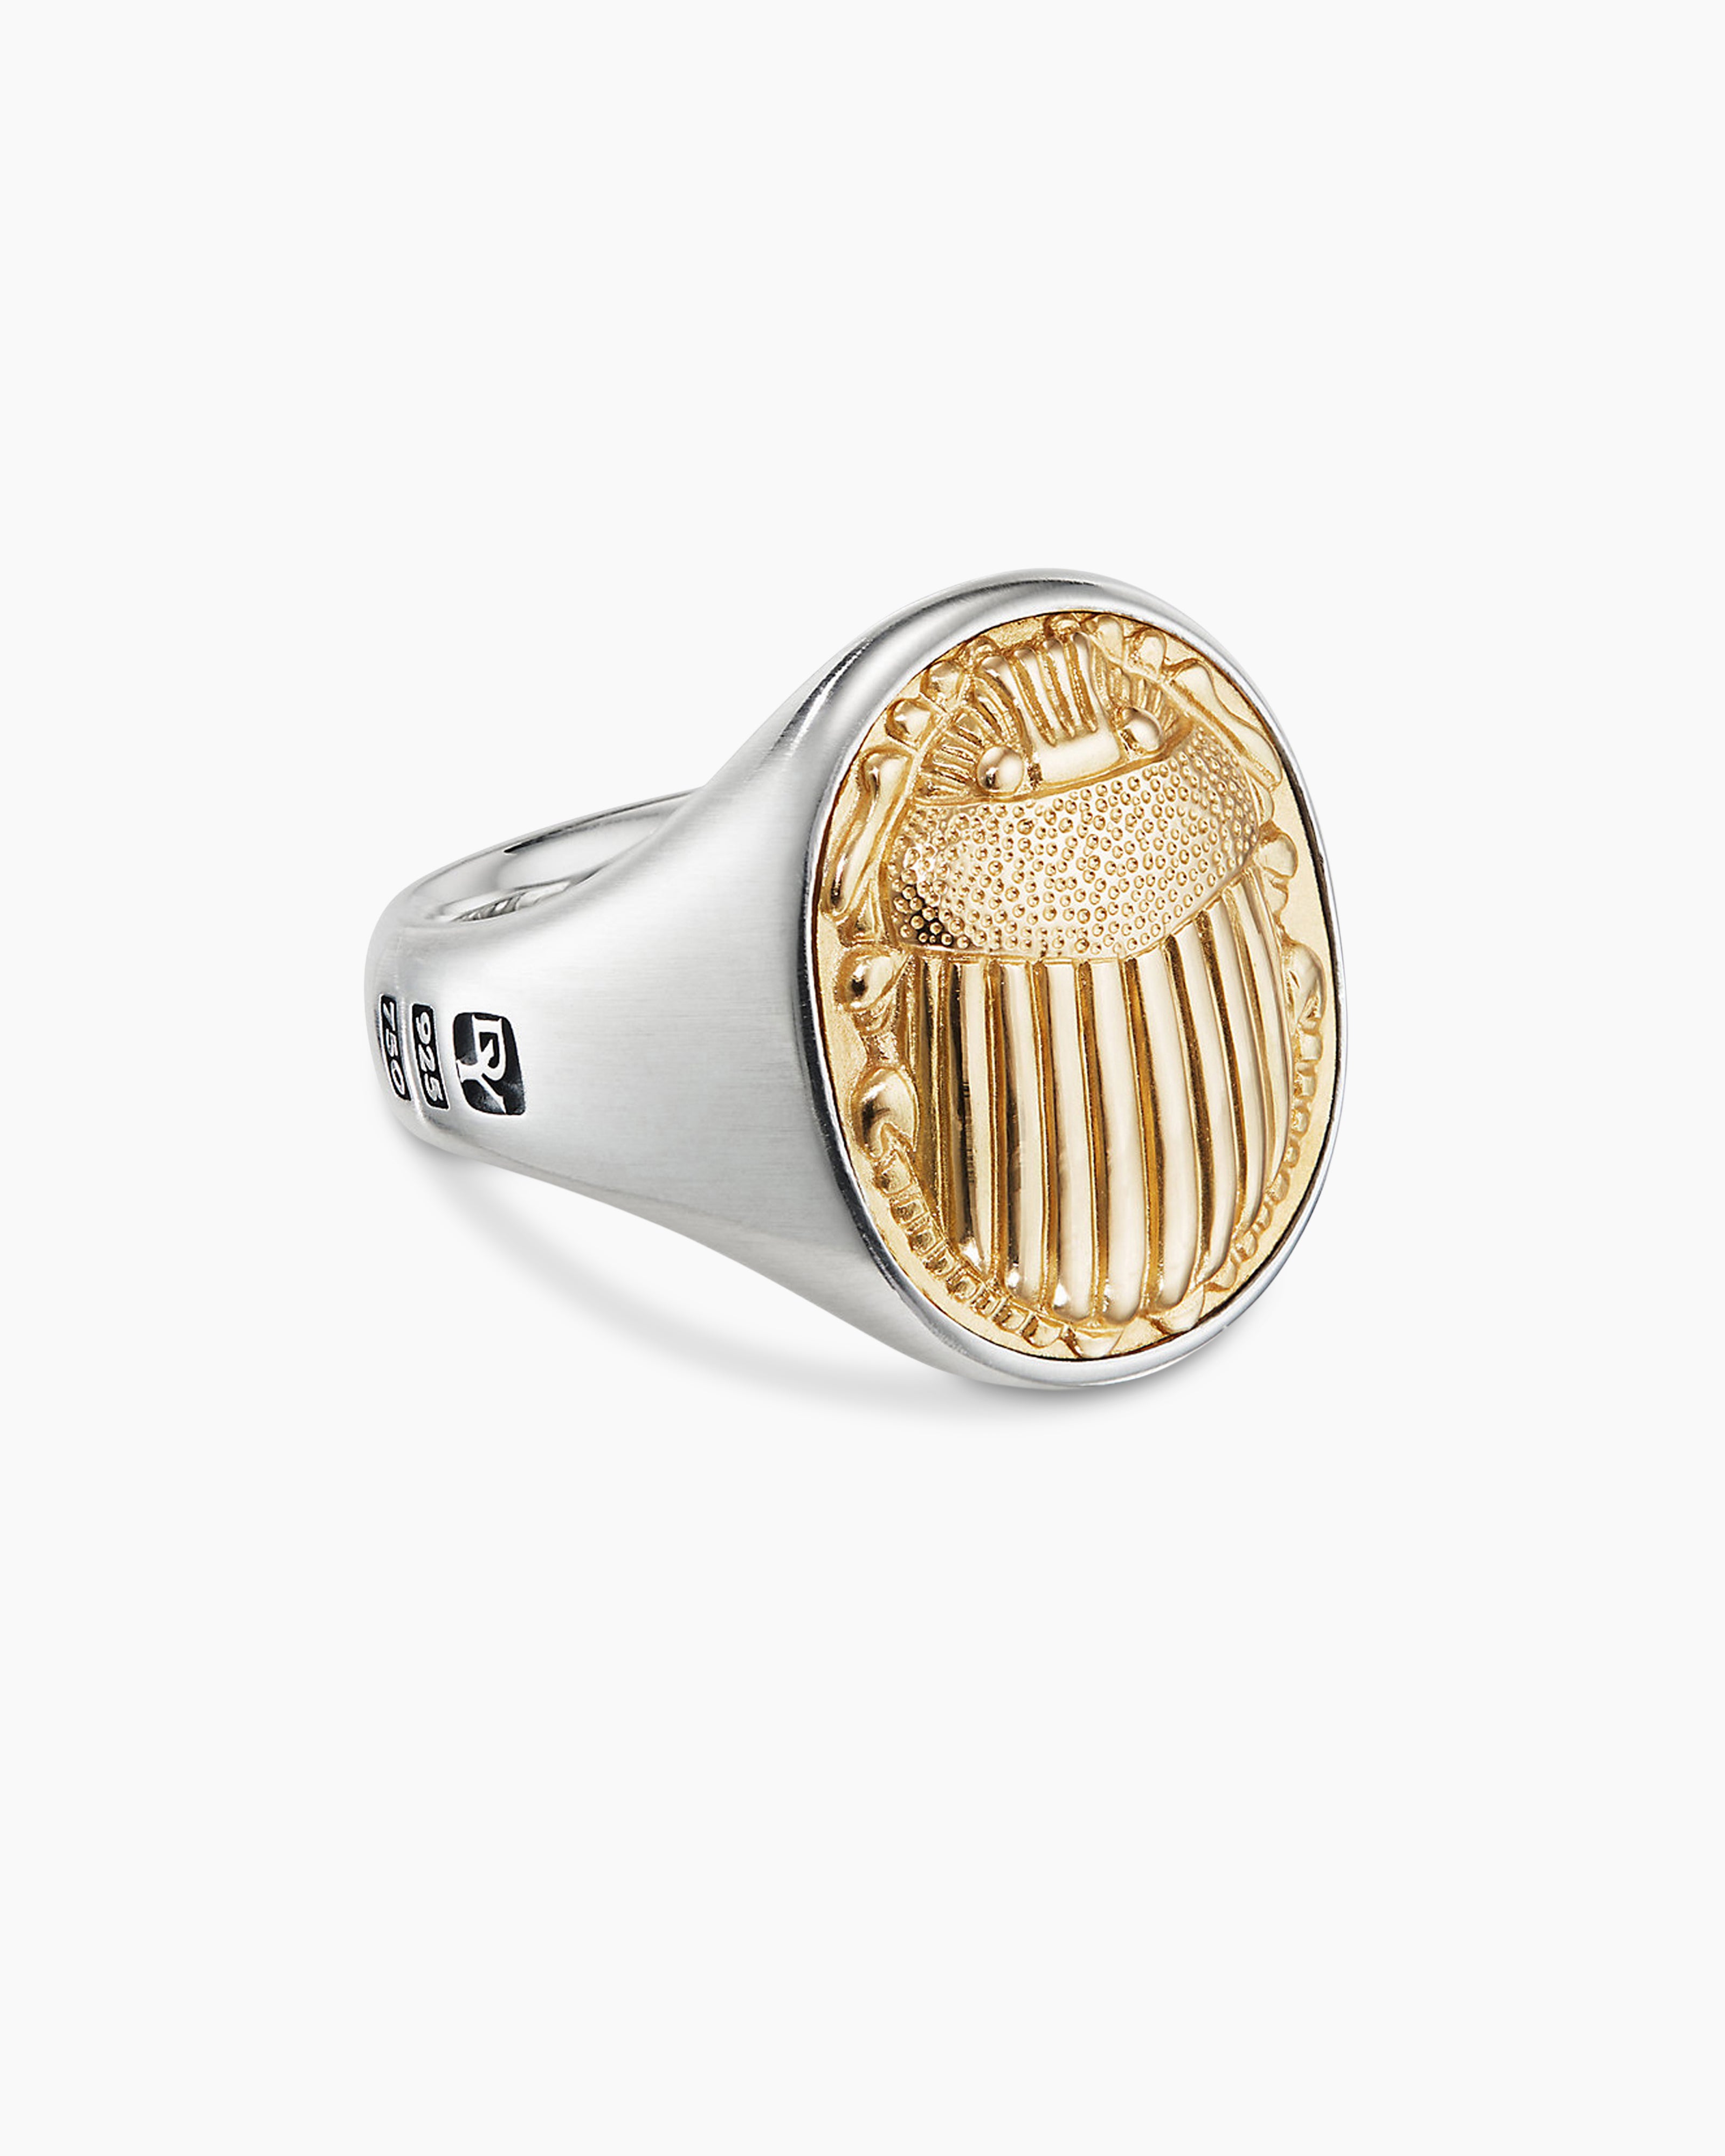 Petrvs Scarab Signet Ring in Sterling Silver with 18K Gold, 21.5mm | David Yurman